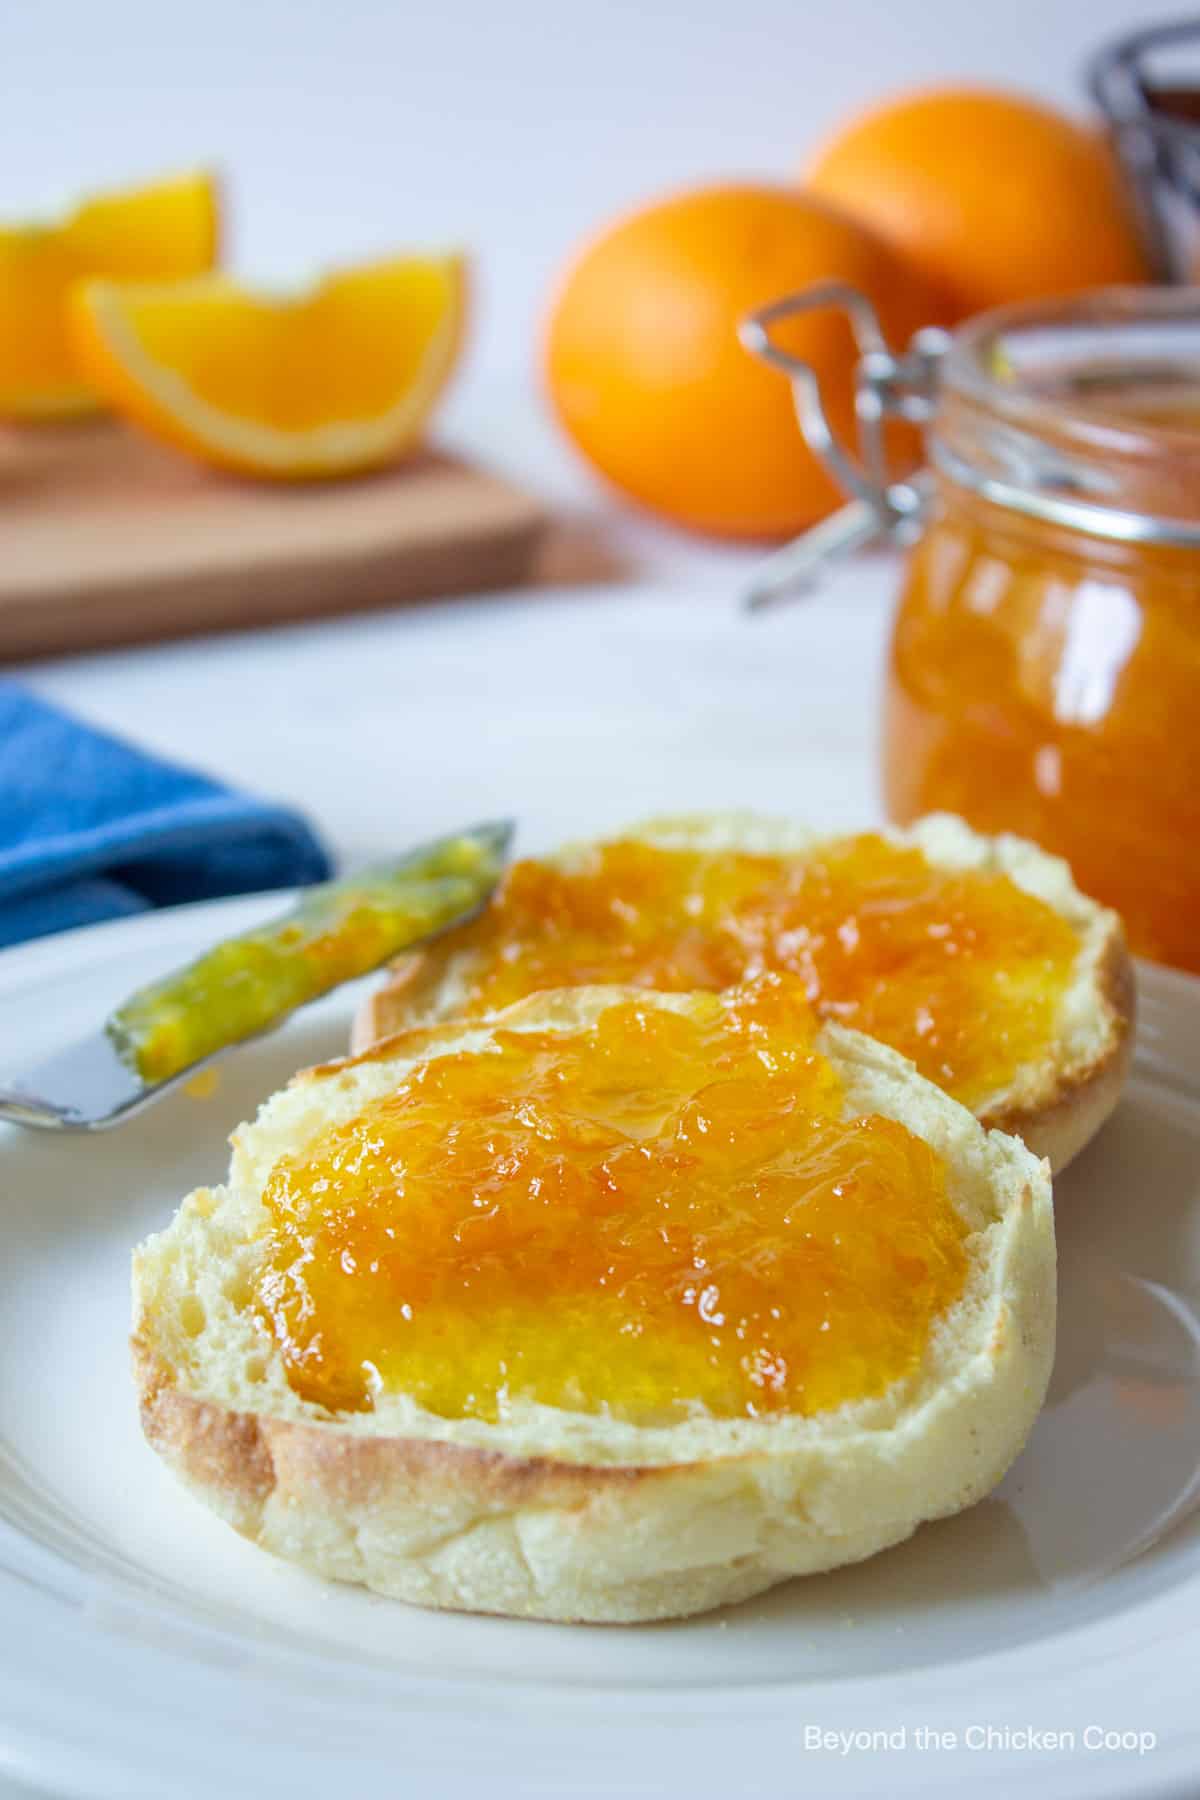 English muffins topped with orange jam.